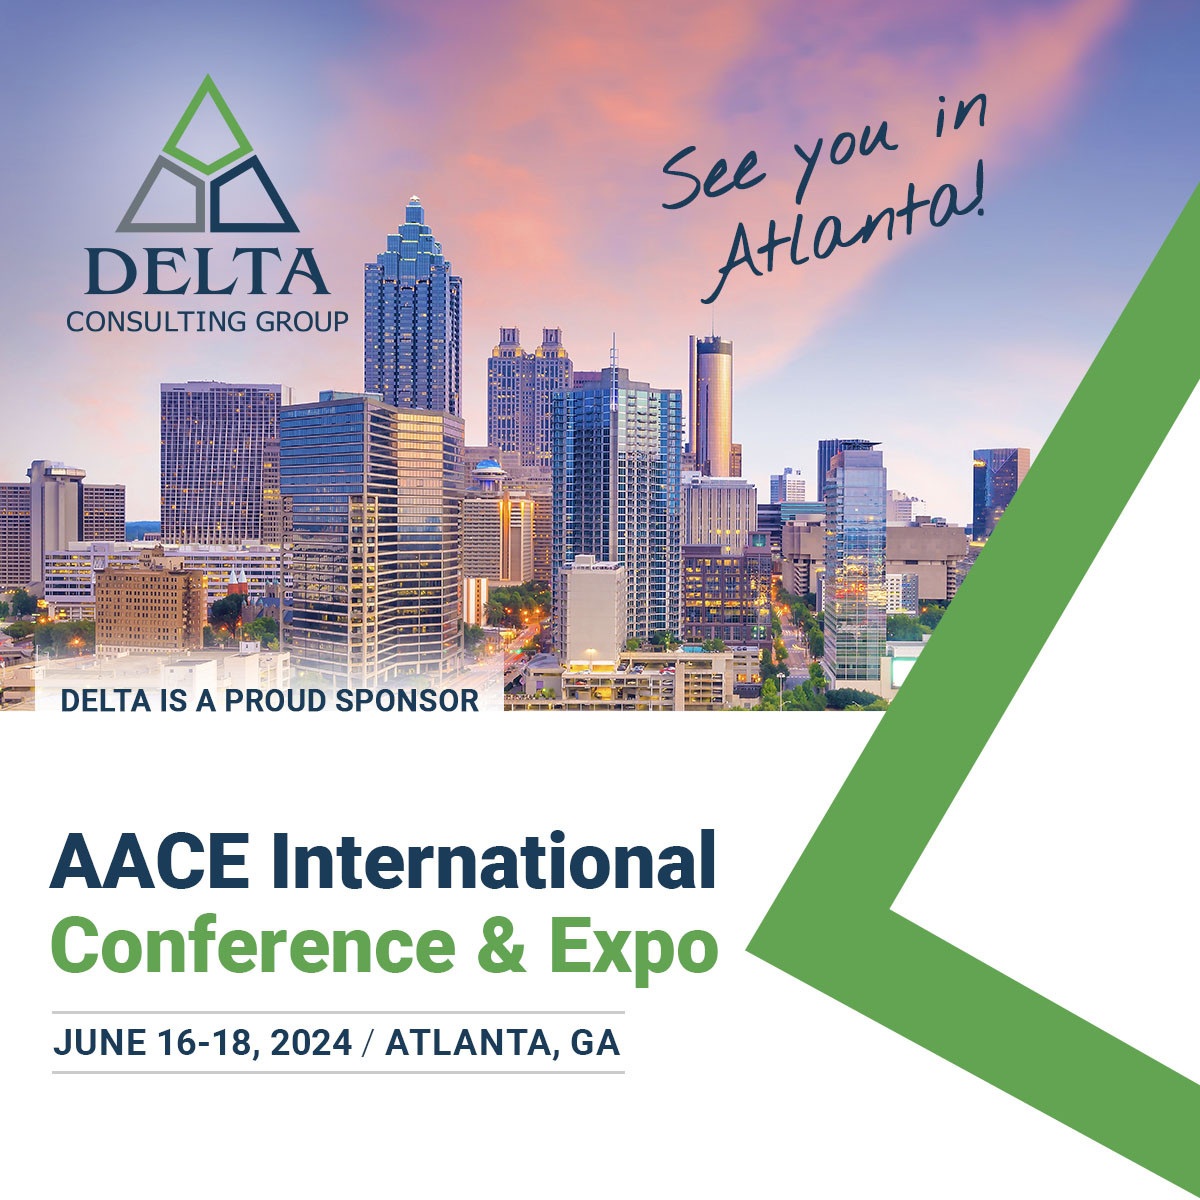 AACE International Conference & Expo